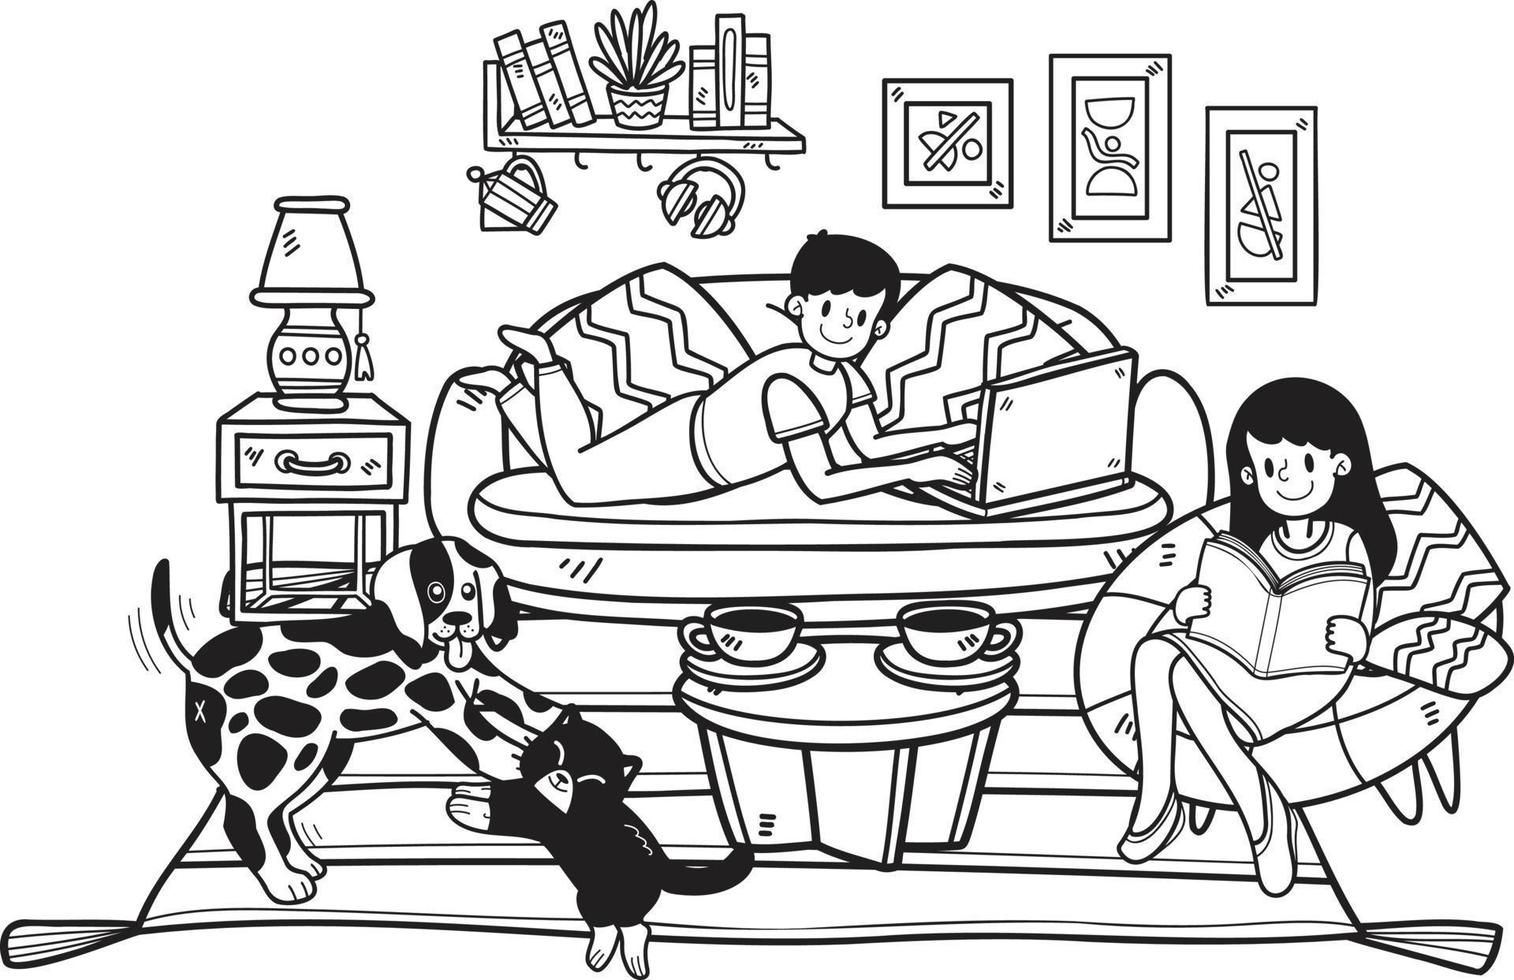 Hand Drawn owner is sleeping with the dog and cat in the room illustration in doodle style vector